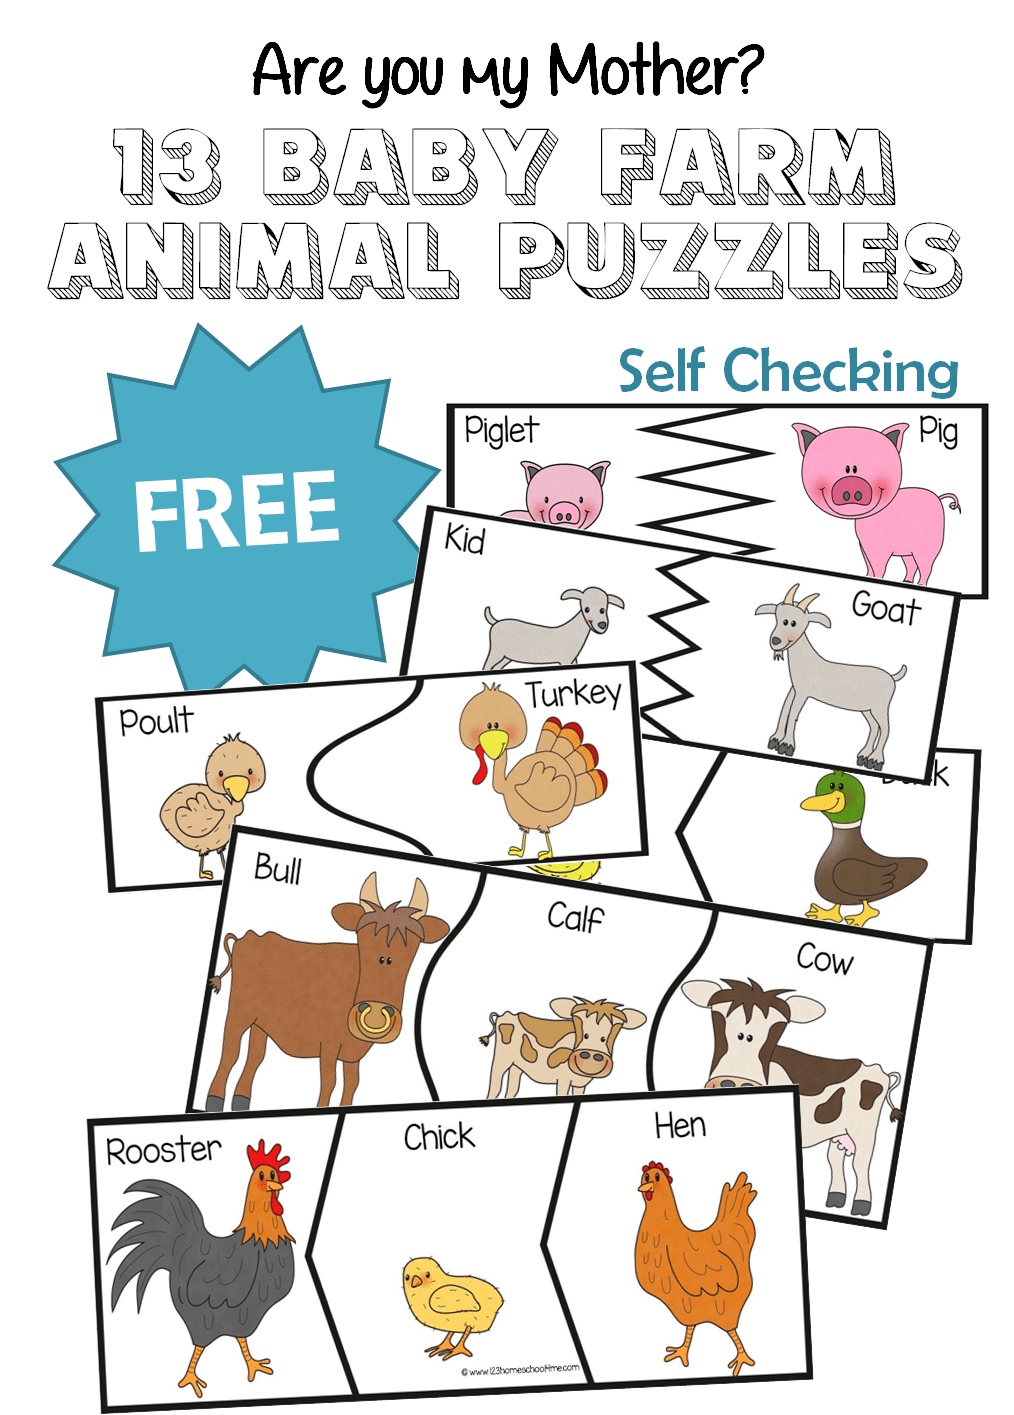 baby-animals-and-their-mothers-worksheets-worksheetscity